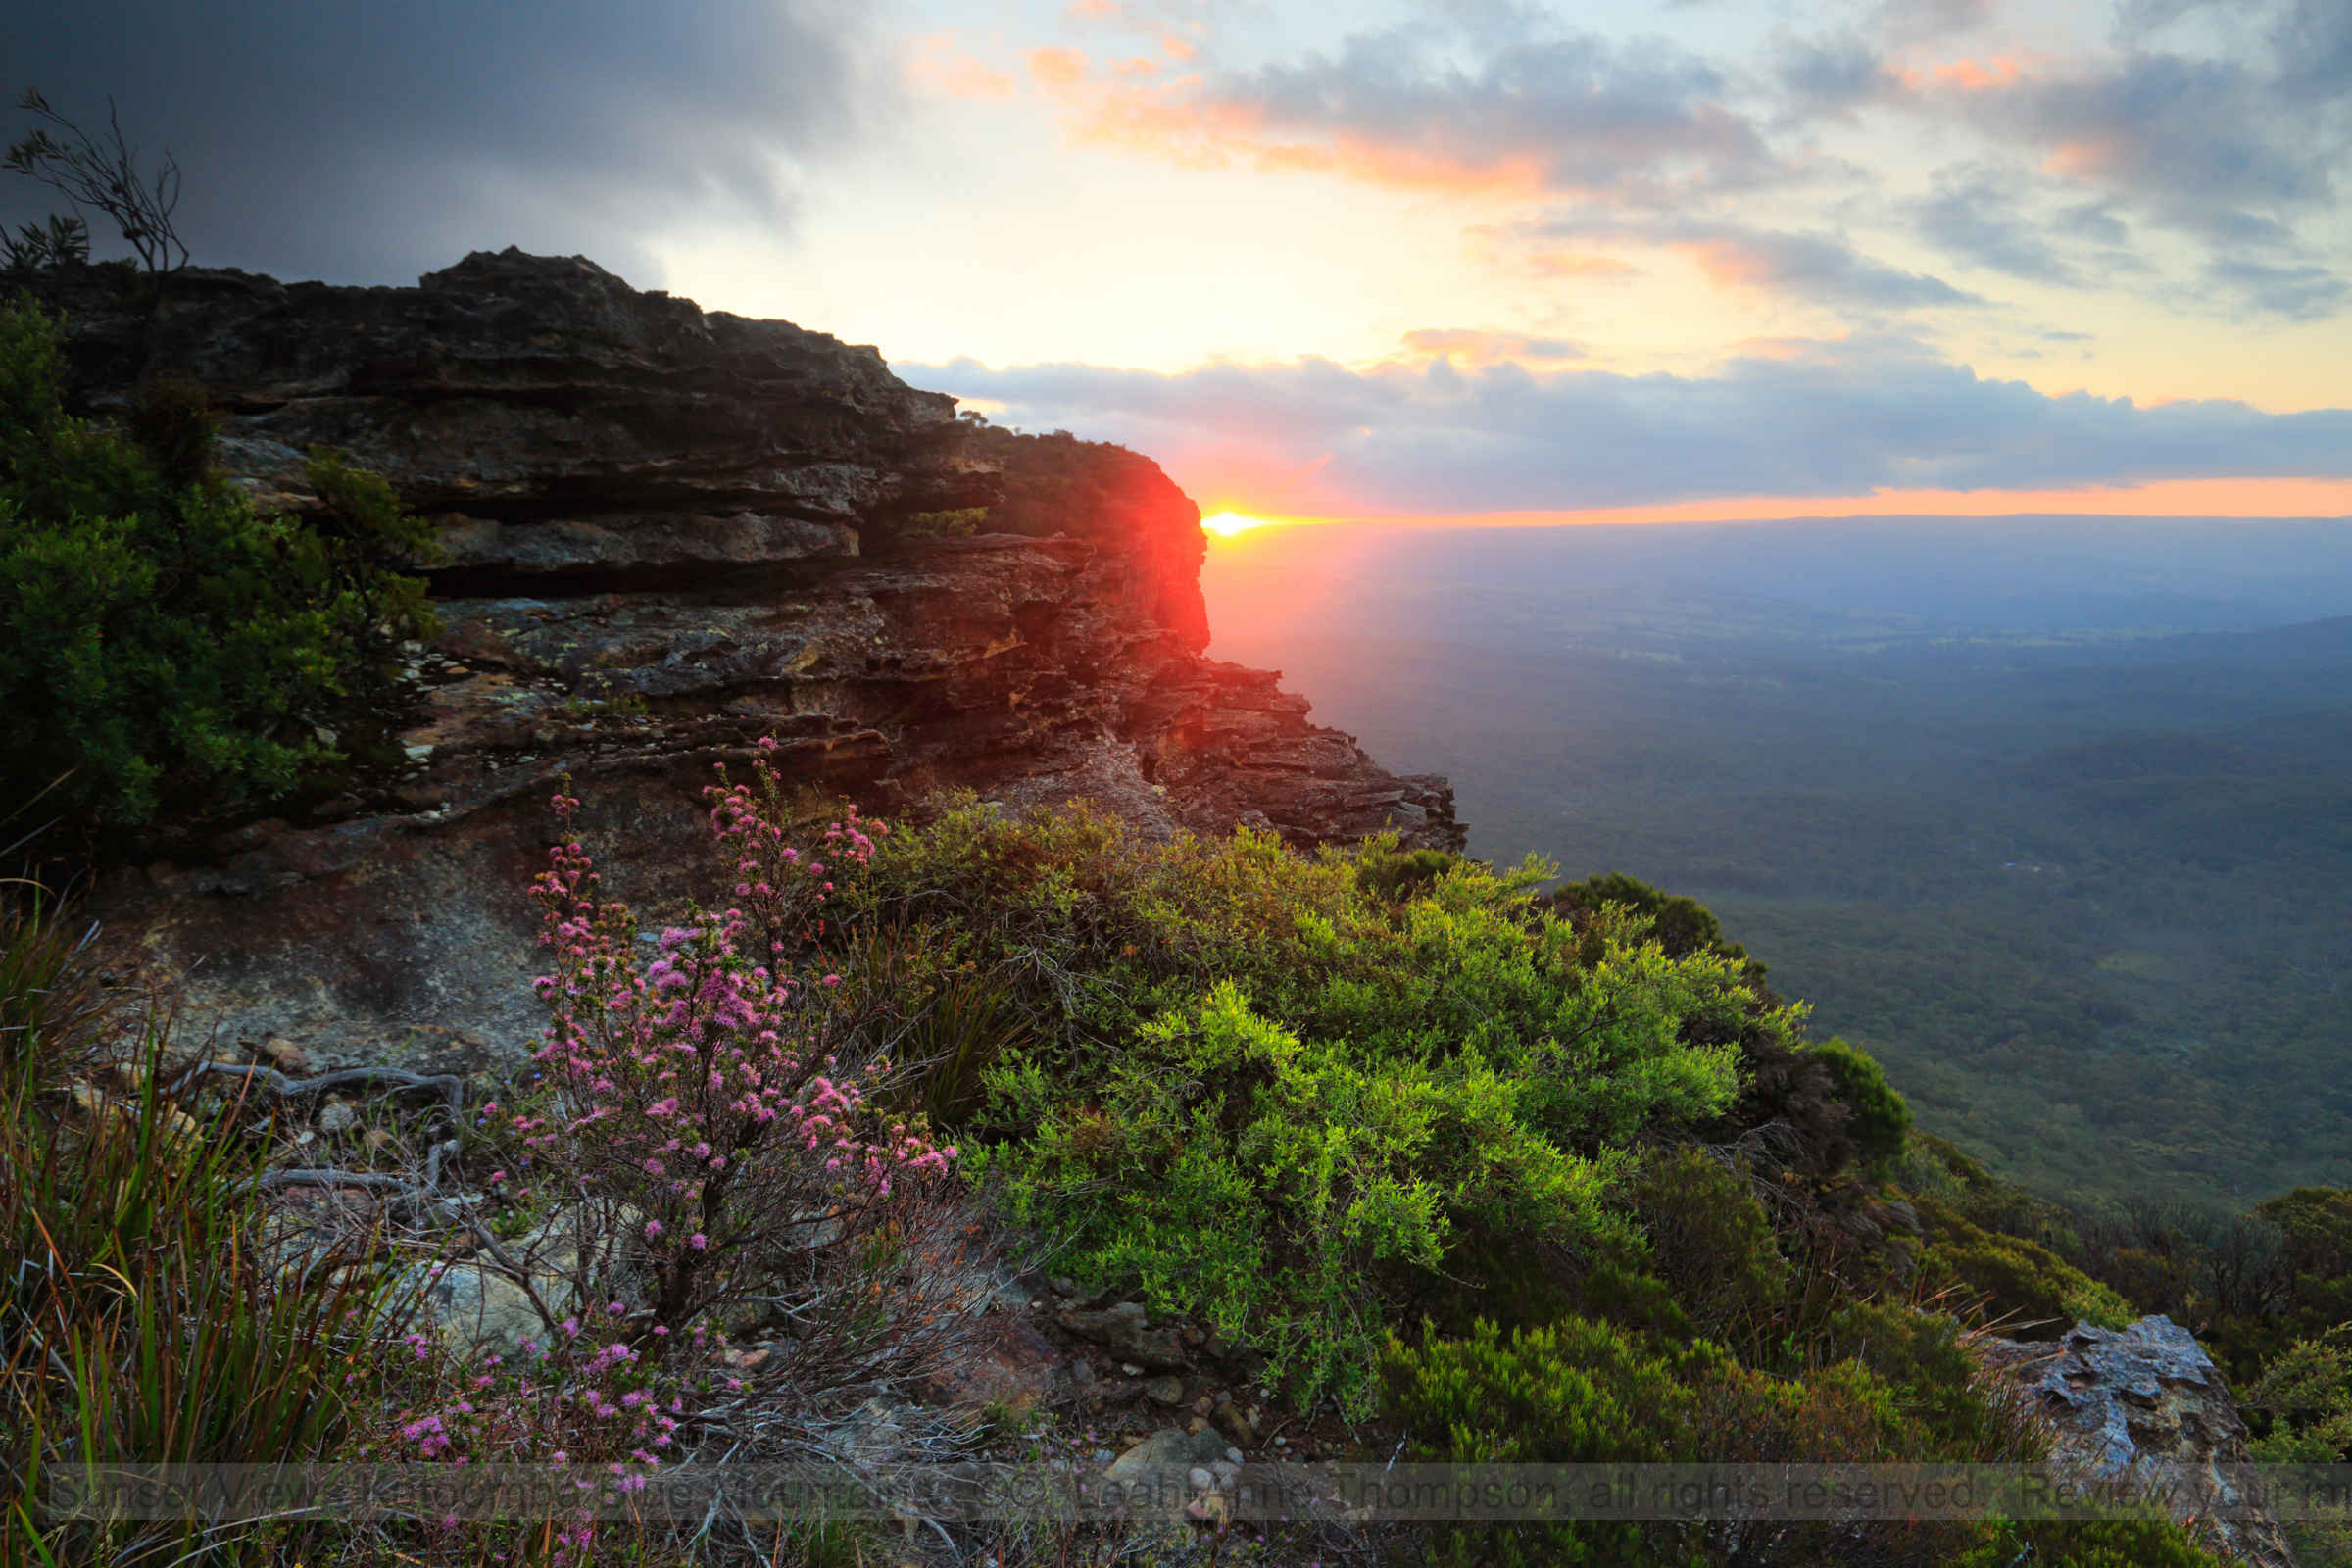 Sunset Views of the Megalong Valley from Katoomba